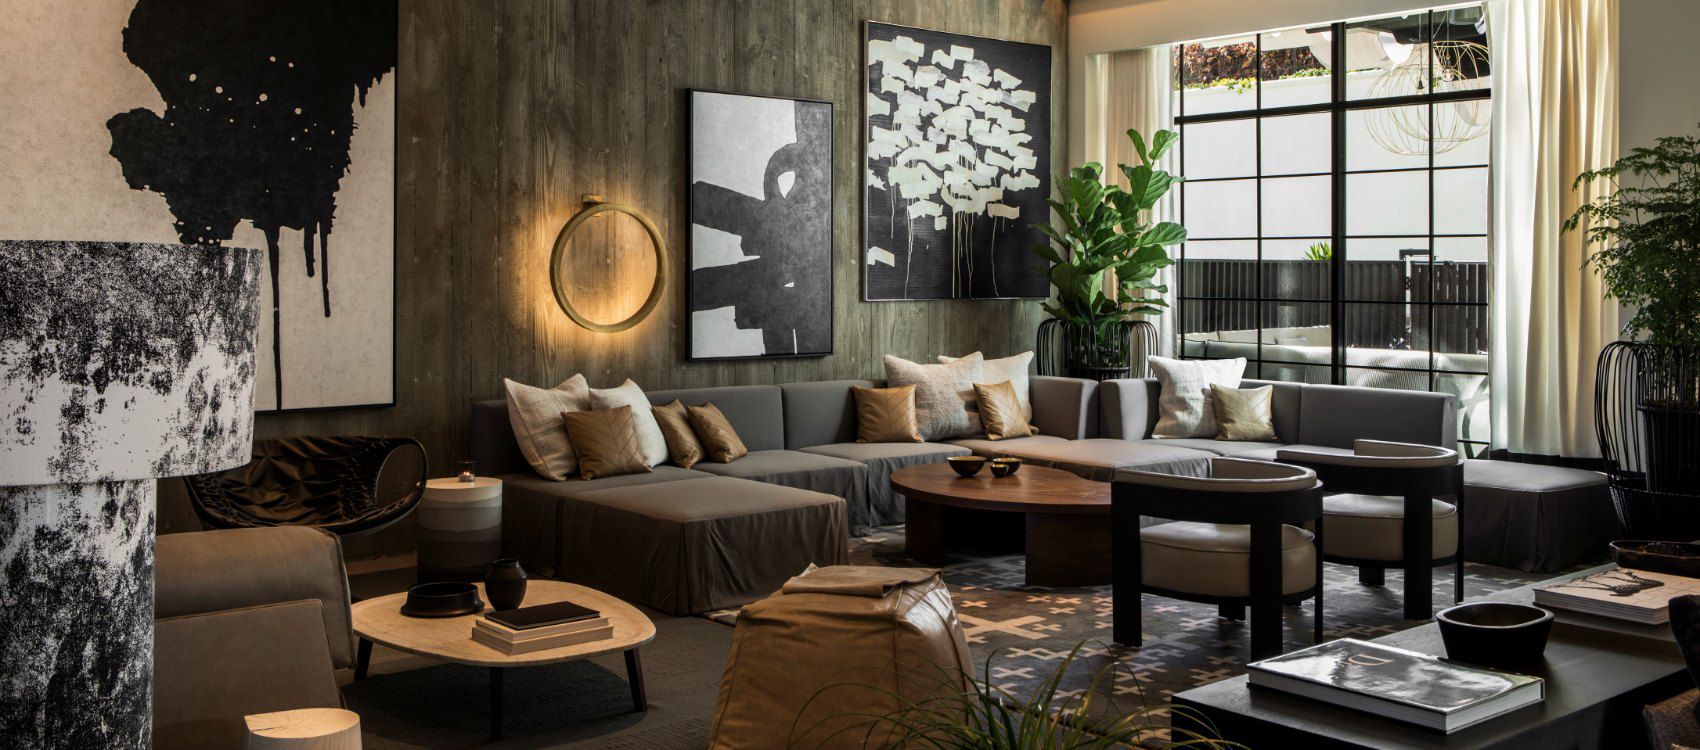 lobby living room with bold black and white decor and modern feel